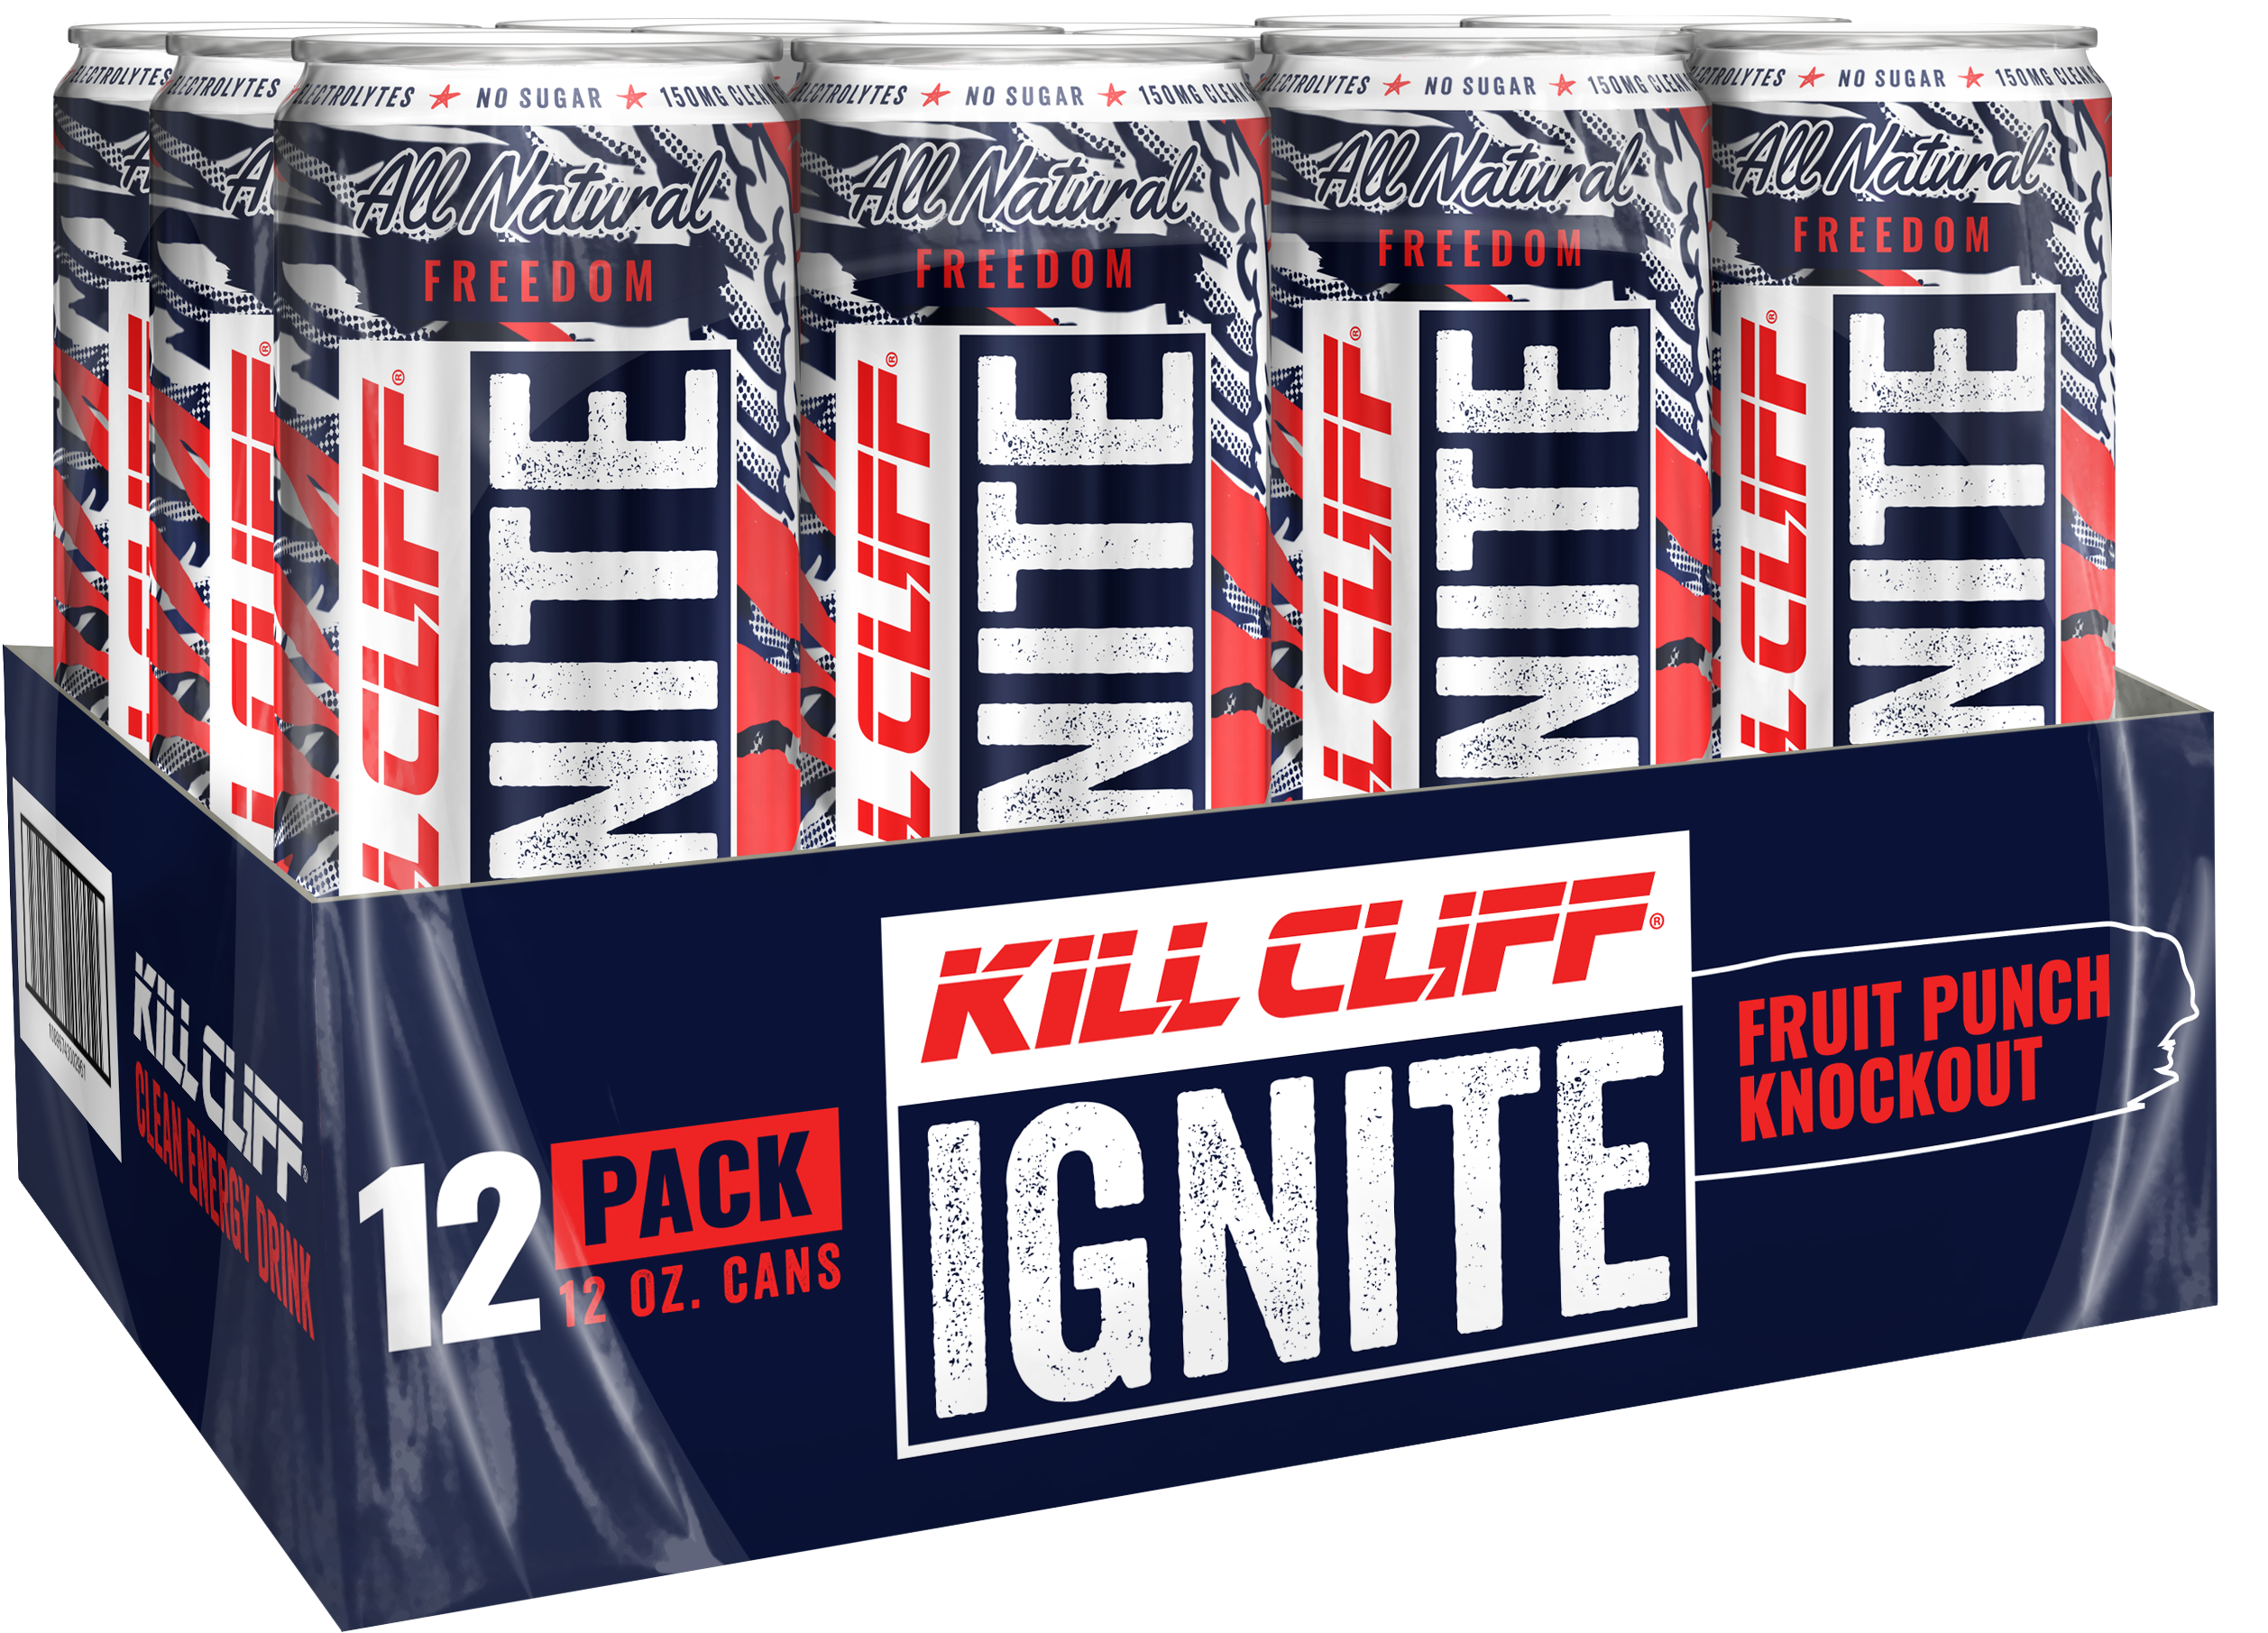 12 red white and blue cans of Kill Cliff in a case